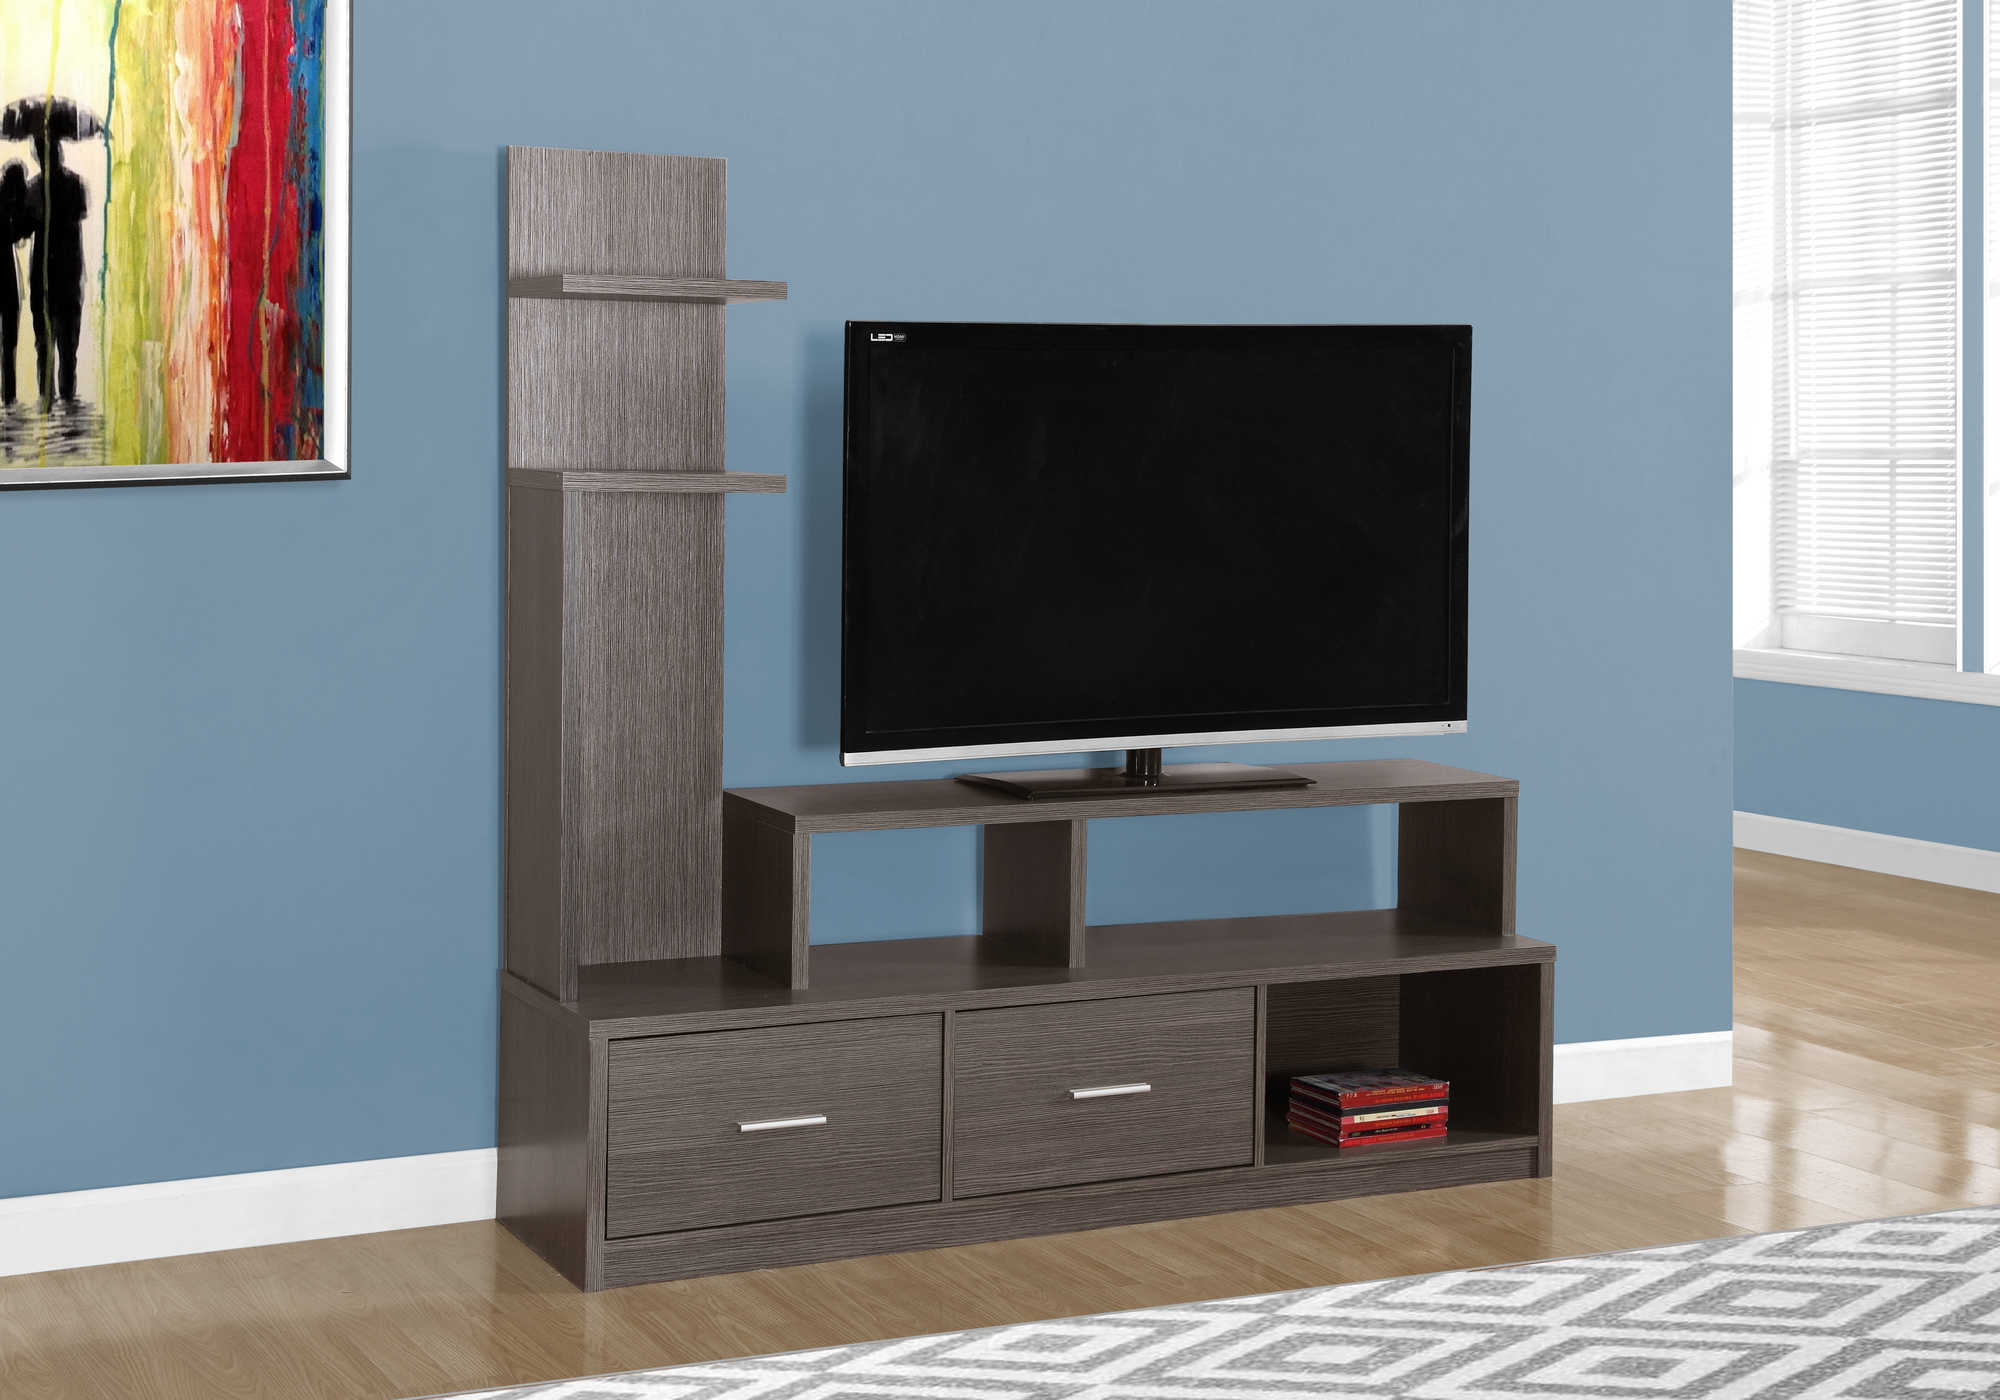 TV STAND - 60"L / GREY WITH A DISPLAY TOWER